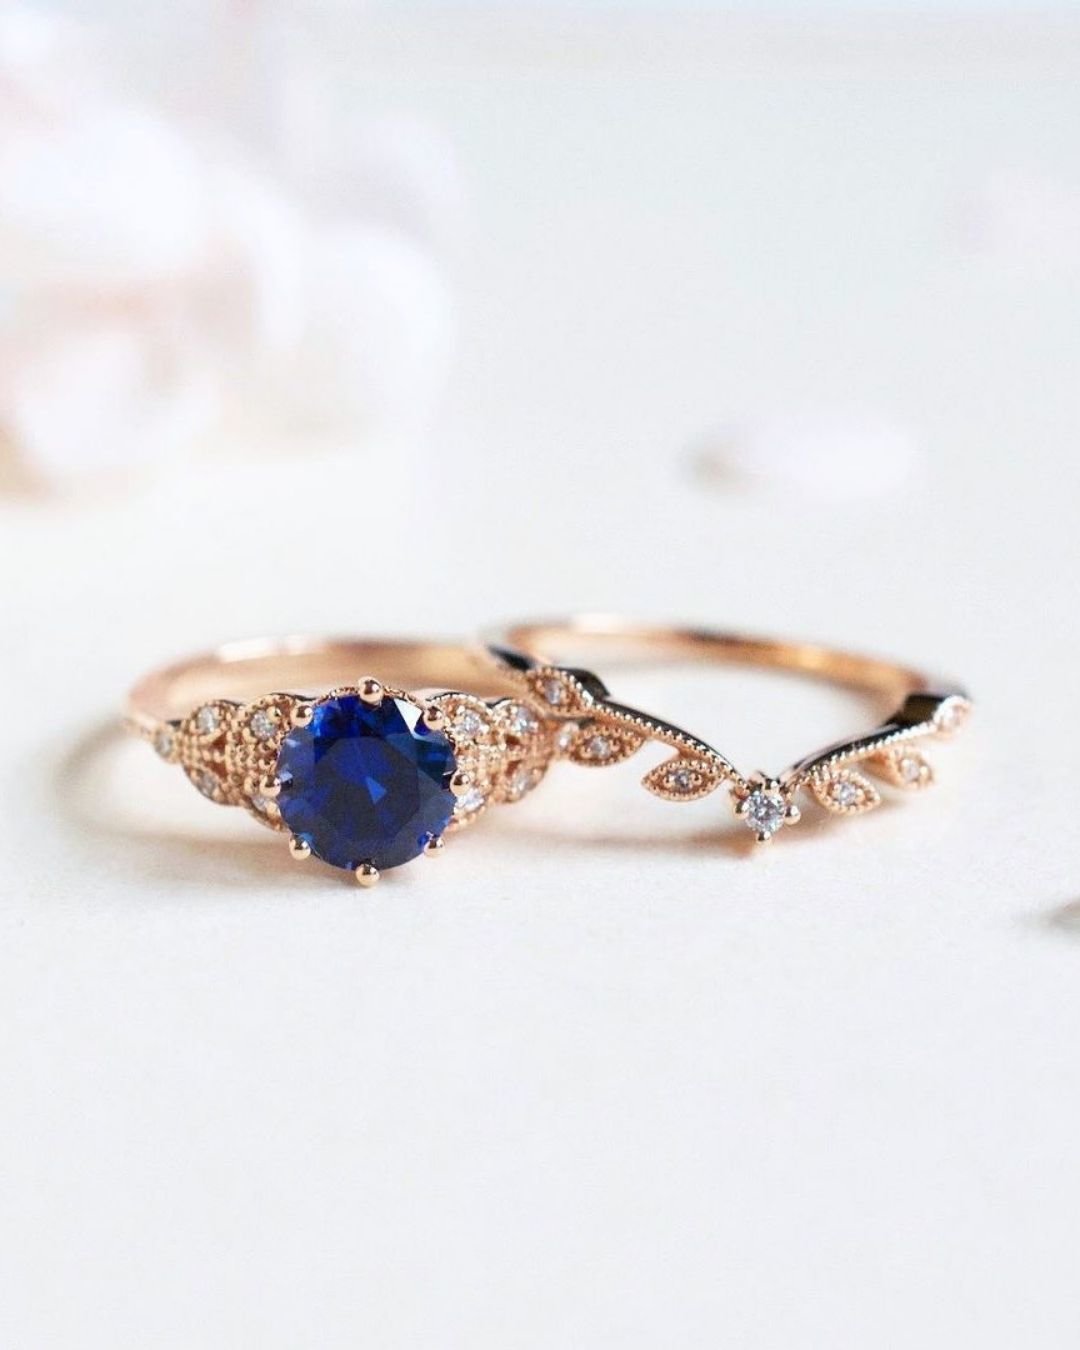 rose gold wedding rings with fantastic sapphires1